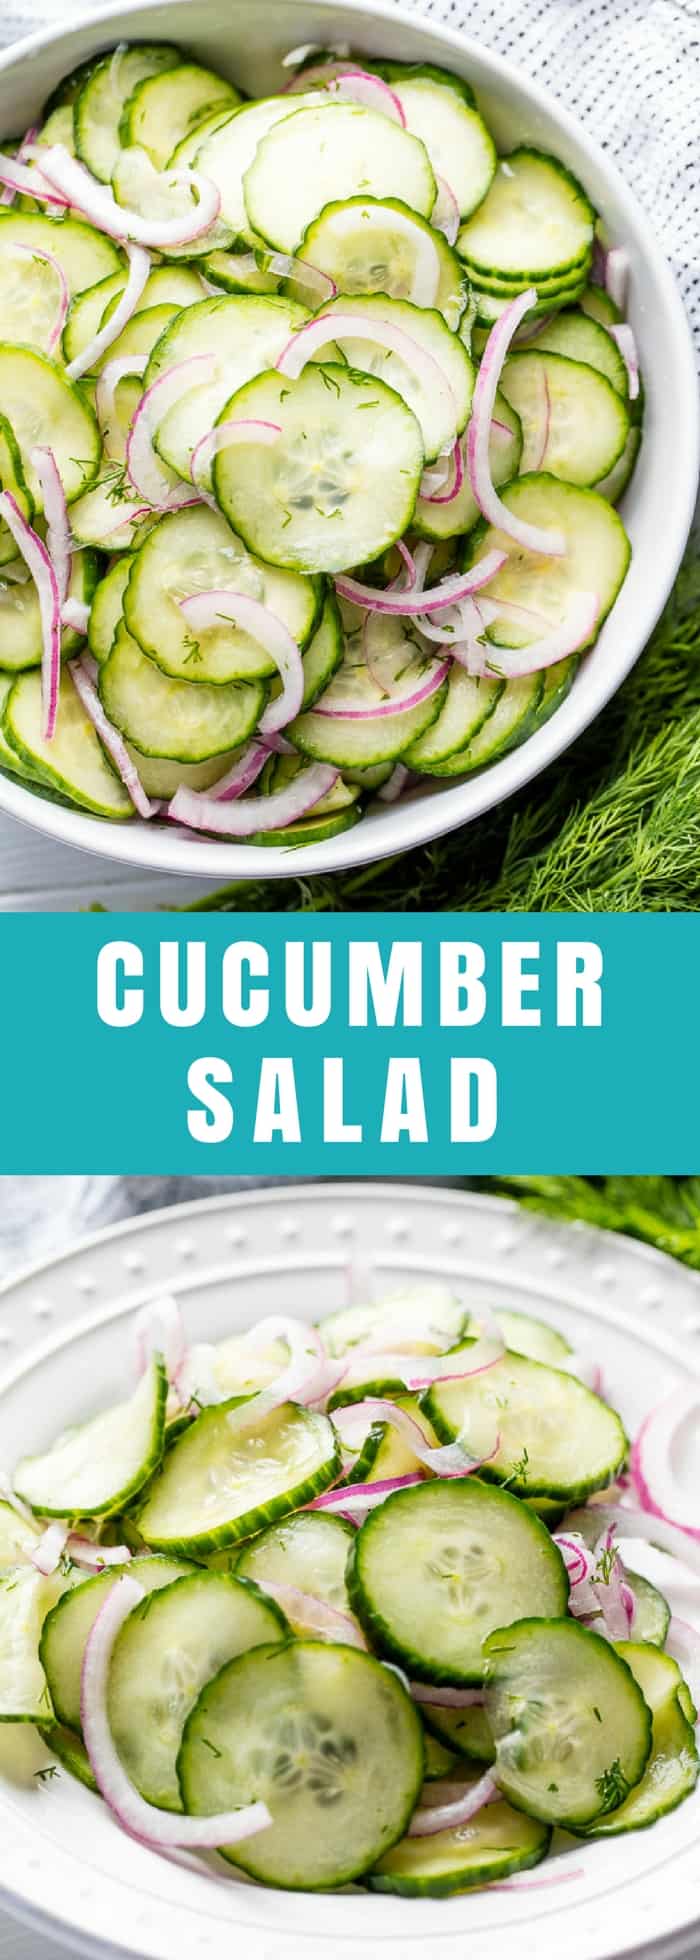 This Easy Cucumber Salad recipe is a family favorite recipe that people have been enjoying for ages. Thinly sliced cucumbers and onion are tossed in a sweet and tangy vinaigrette for a classic side dish. 